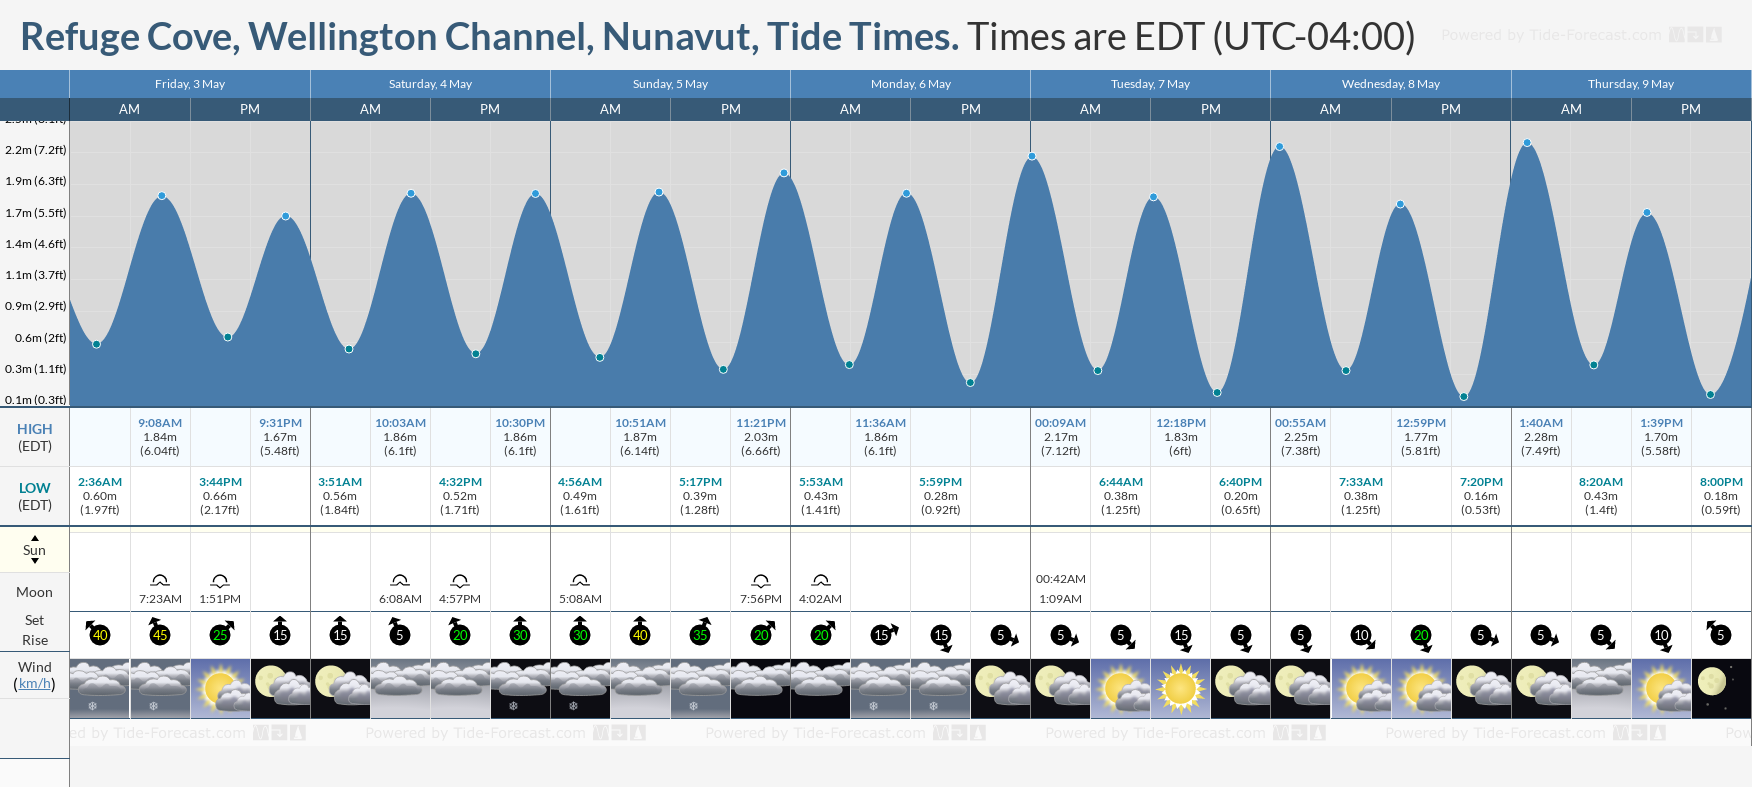 Refuge Cove, Wellington Channel, Nunavut Tide Chart including high and low tide tide times for the next 7 days